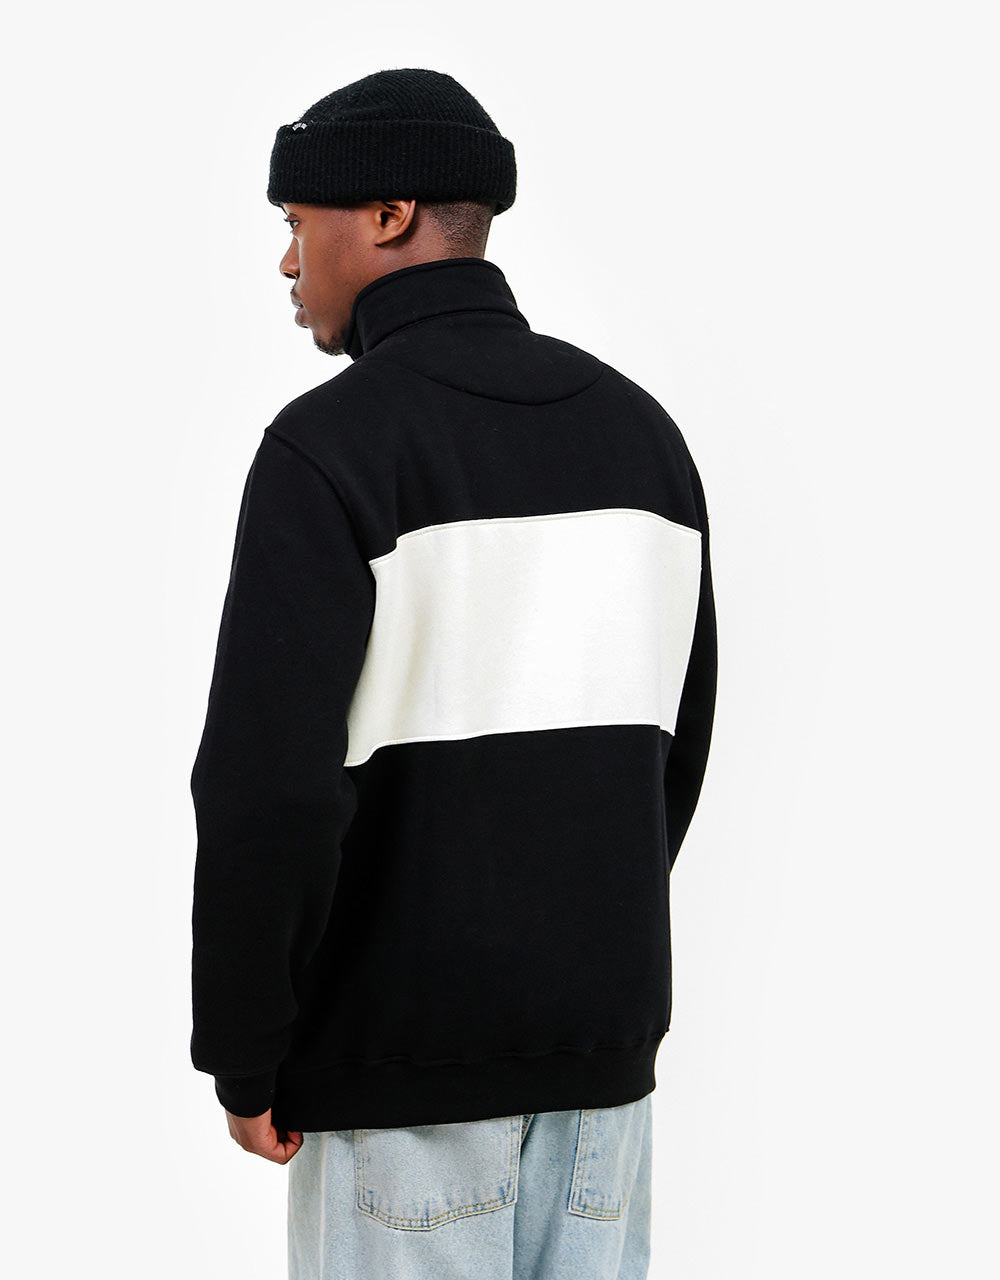 Route One Blocked 1/4 Zip Sweat - Black/Natural